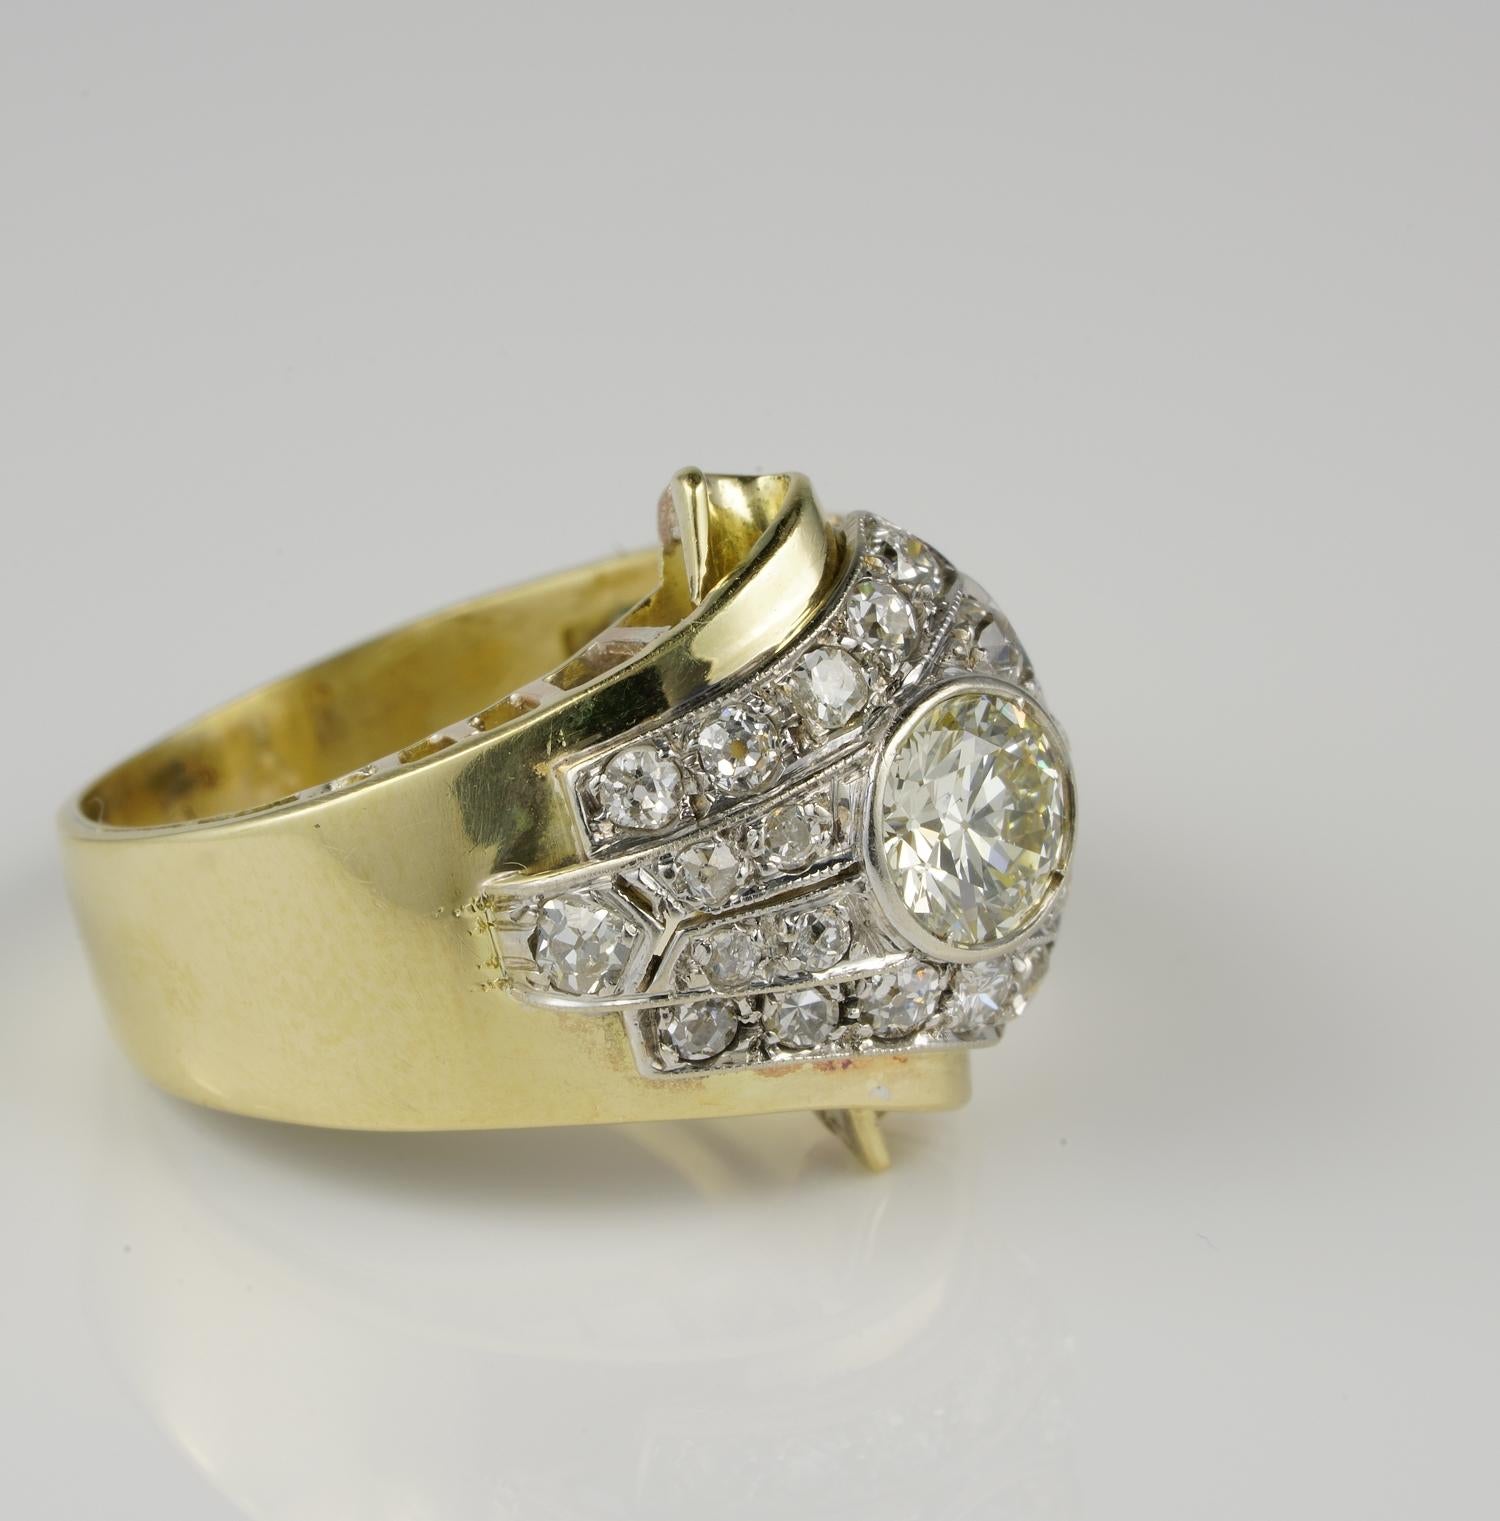 This impressive late Art deco ring is 1935 ca.
Hand modelled of solid 18 Kt gold and Platinum
Beautifully designed as a distinctive buckle expressing in full the timeless elegance of that era
Top Platinum buckle is overwhelmed by old cut Diamonds